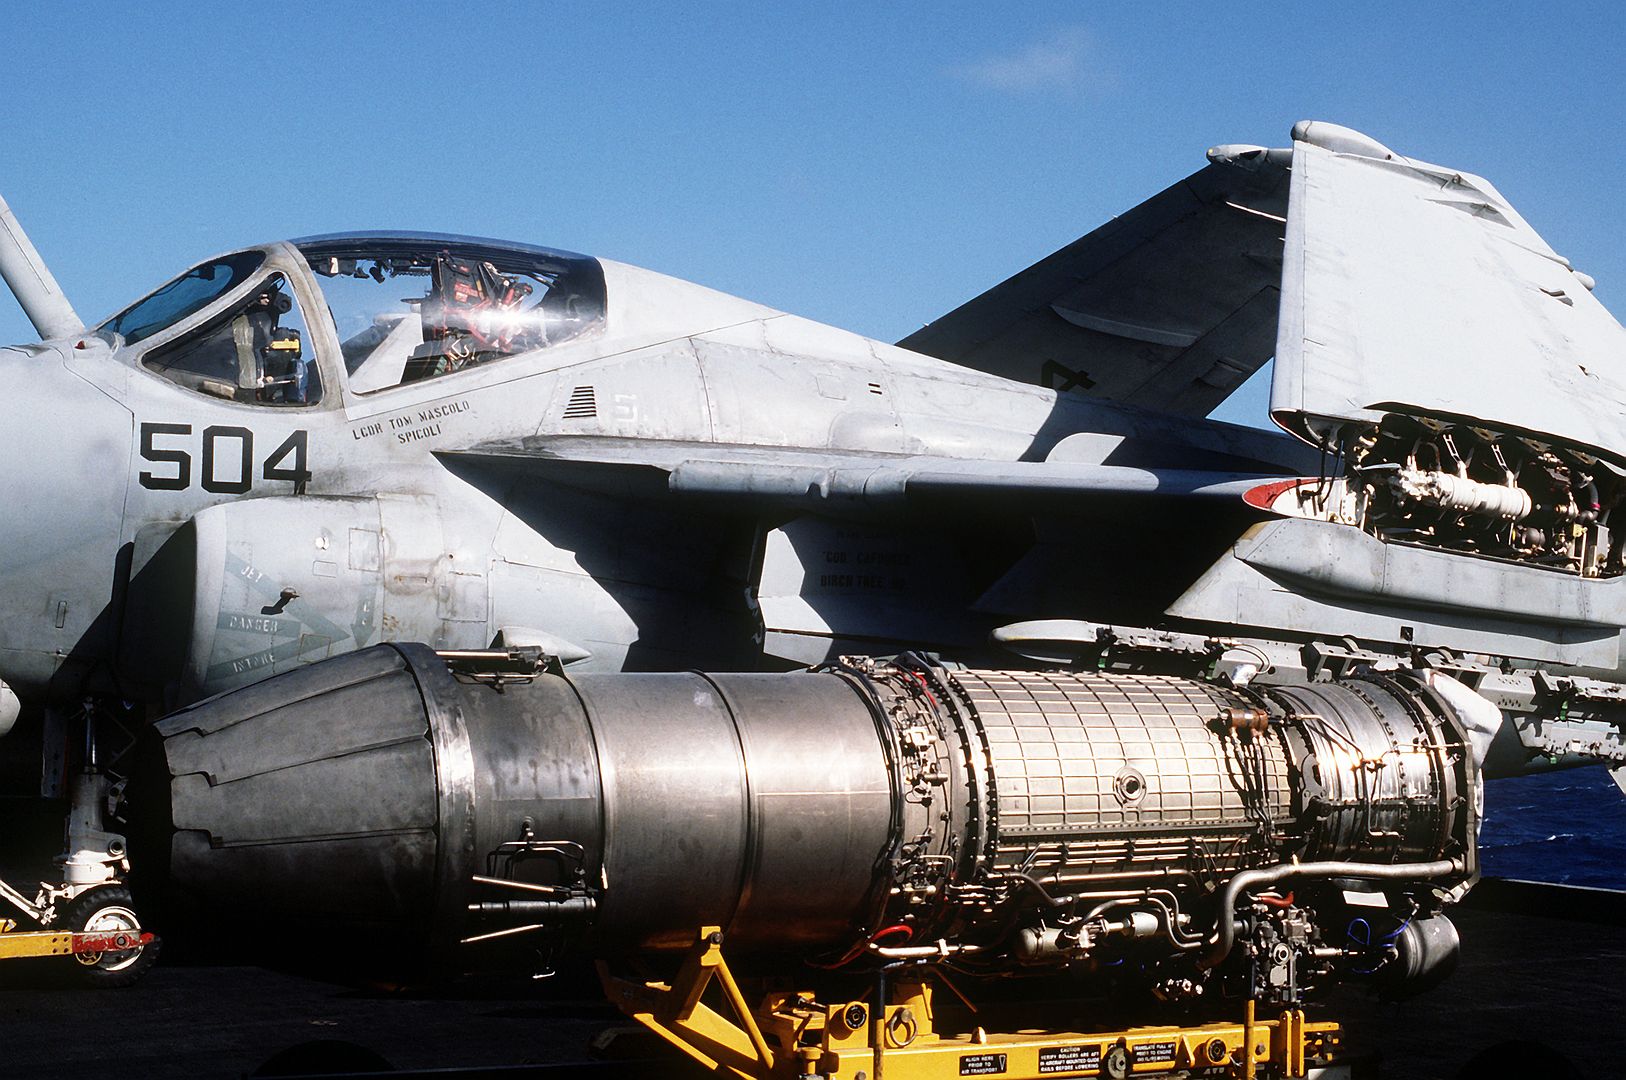 A Pratt Whitney J 52 P 8B Turbojet Engine Rest On A Engine Transportation Cart On The Flight Deck Of The Nuclear Powered Aircraft Carrier USS ABRAHAM LINCOLN